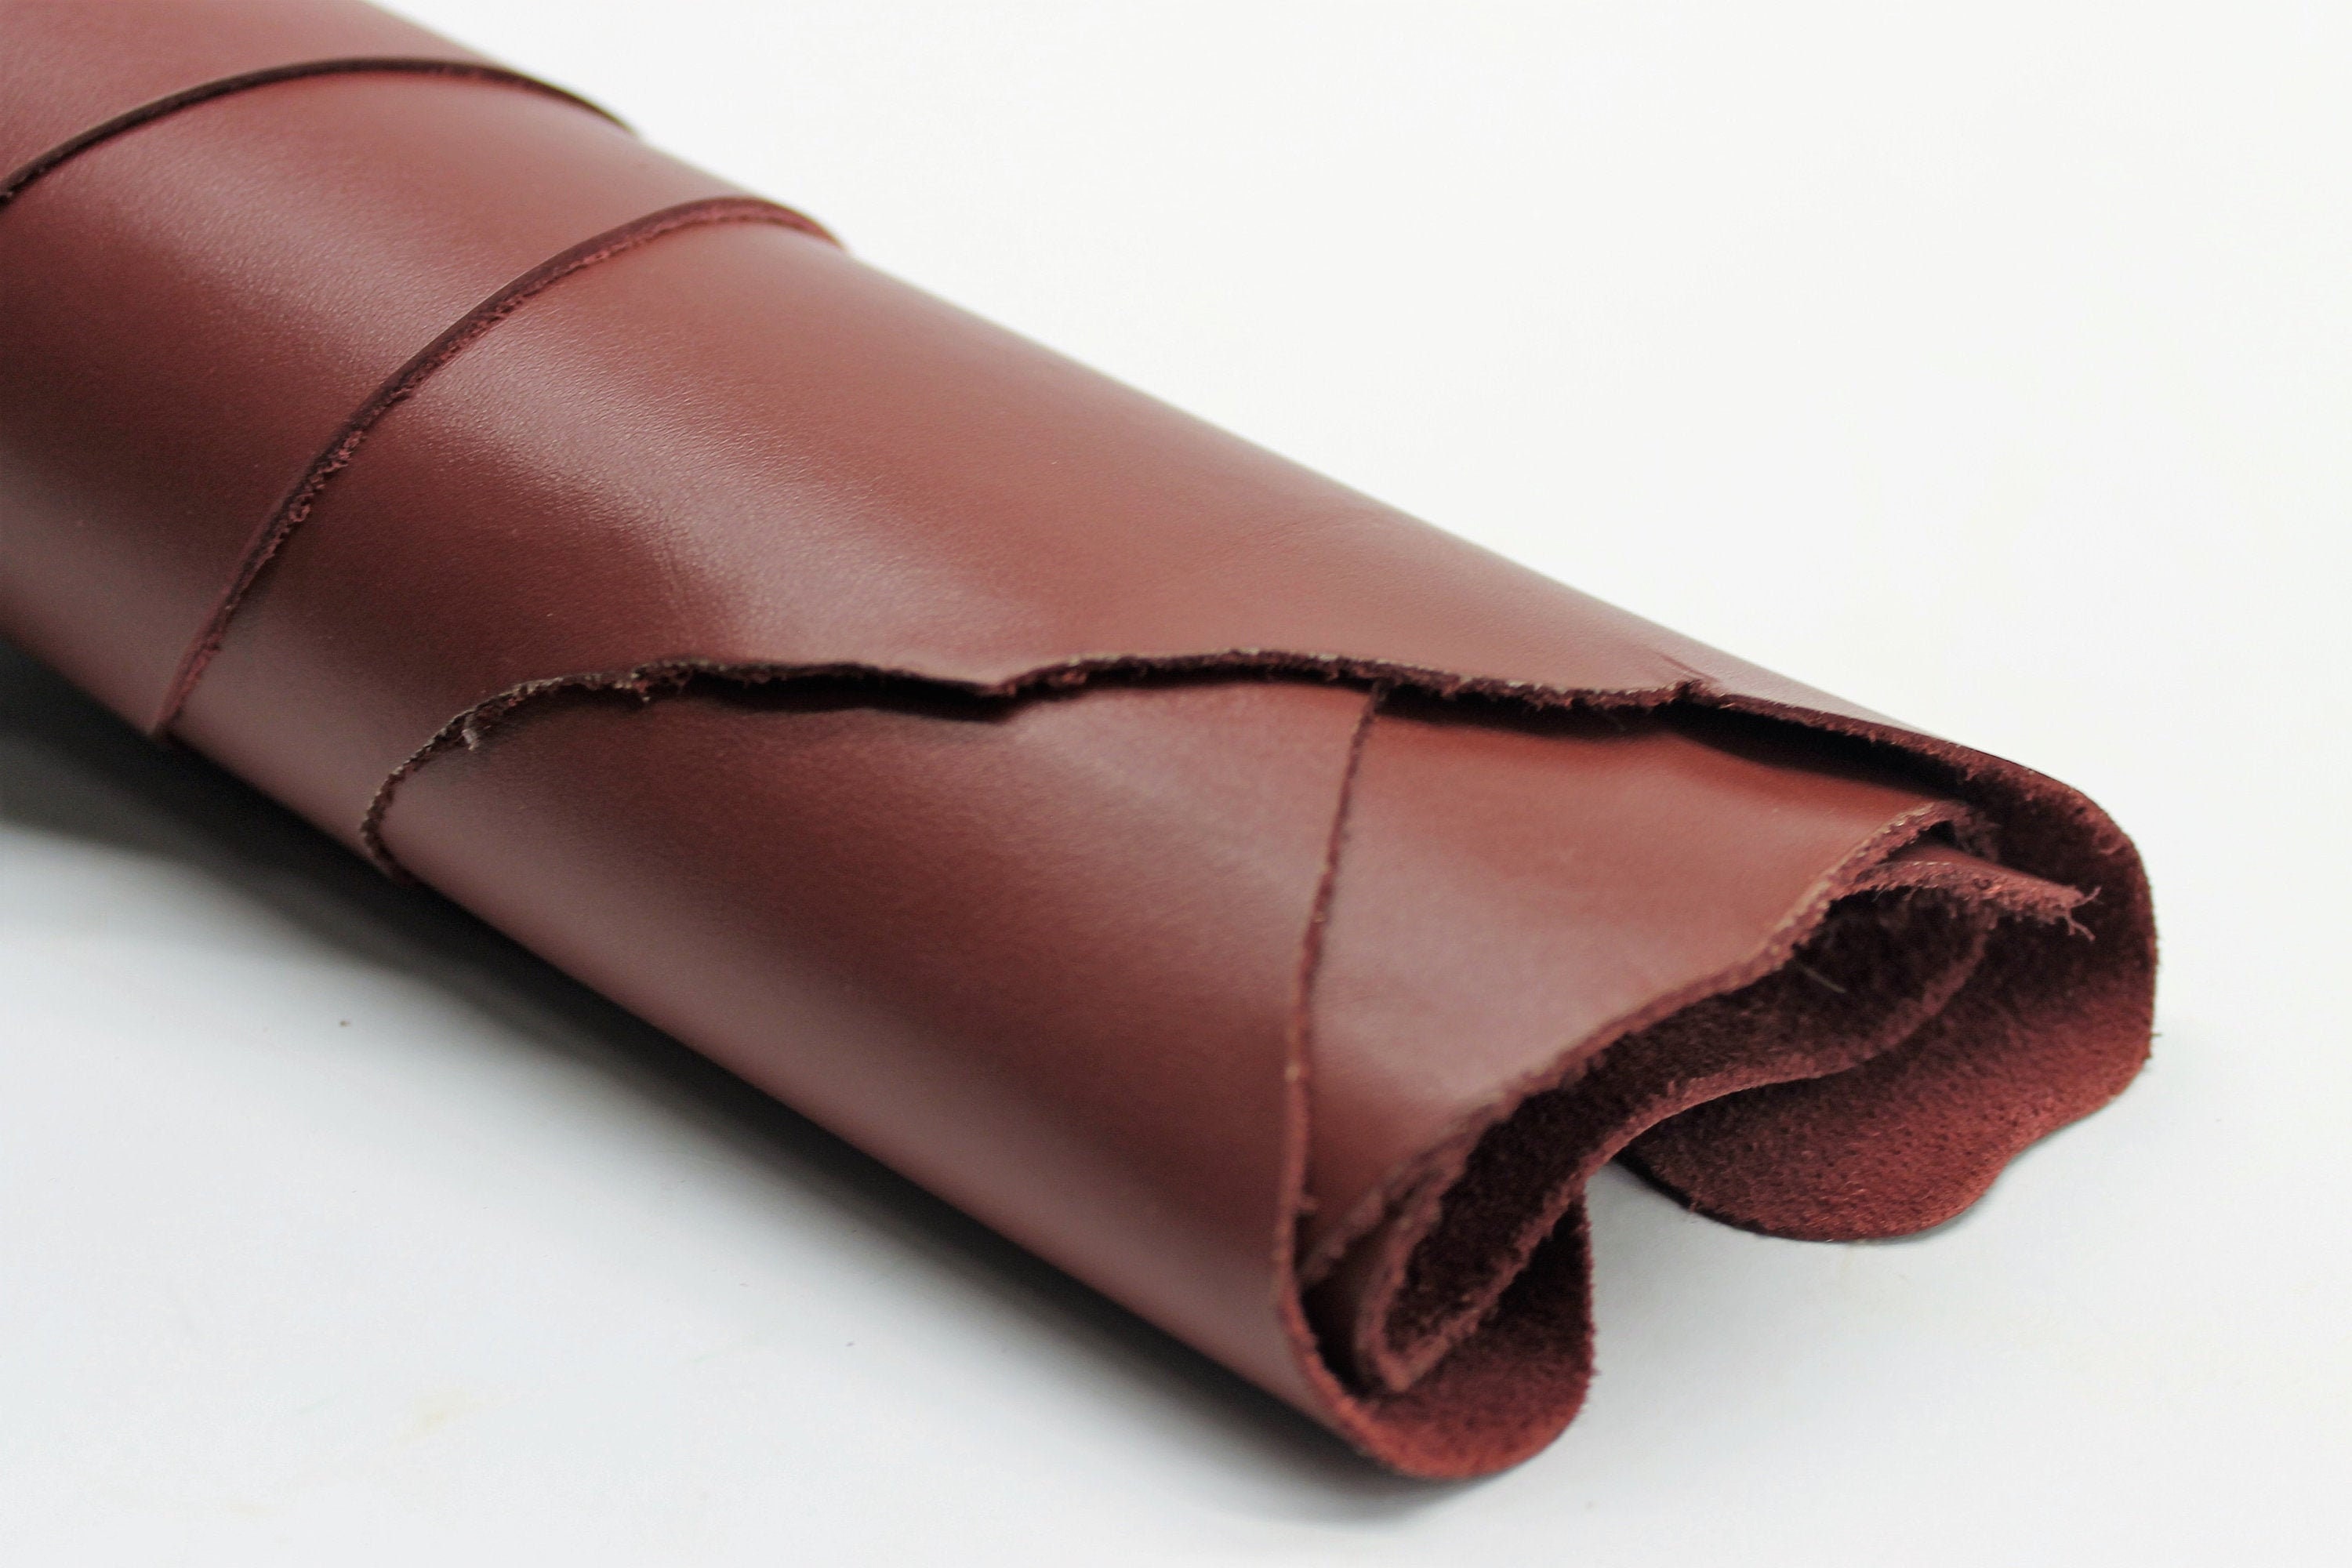 4.5mm Genuine Leather Hide Sheet Cow Full Grain Leather Hide Craft Sewing